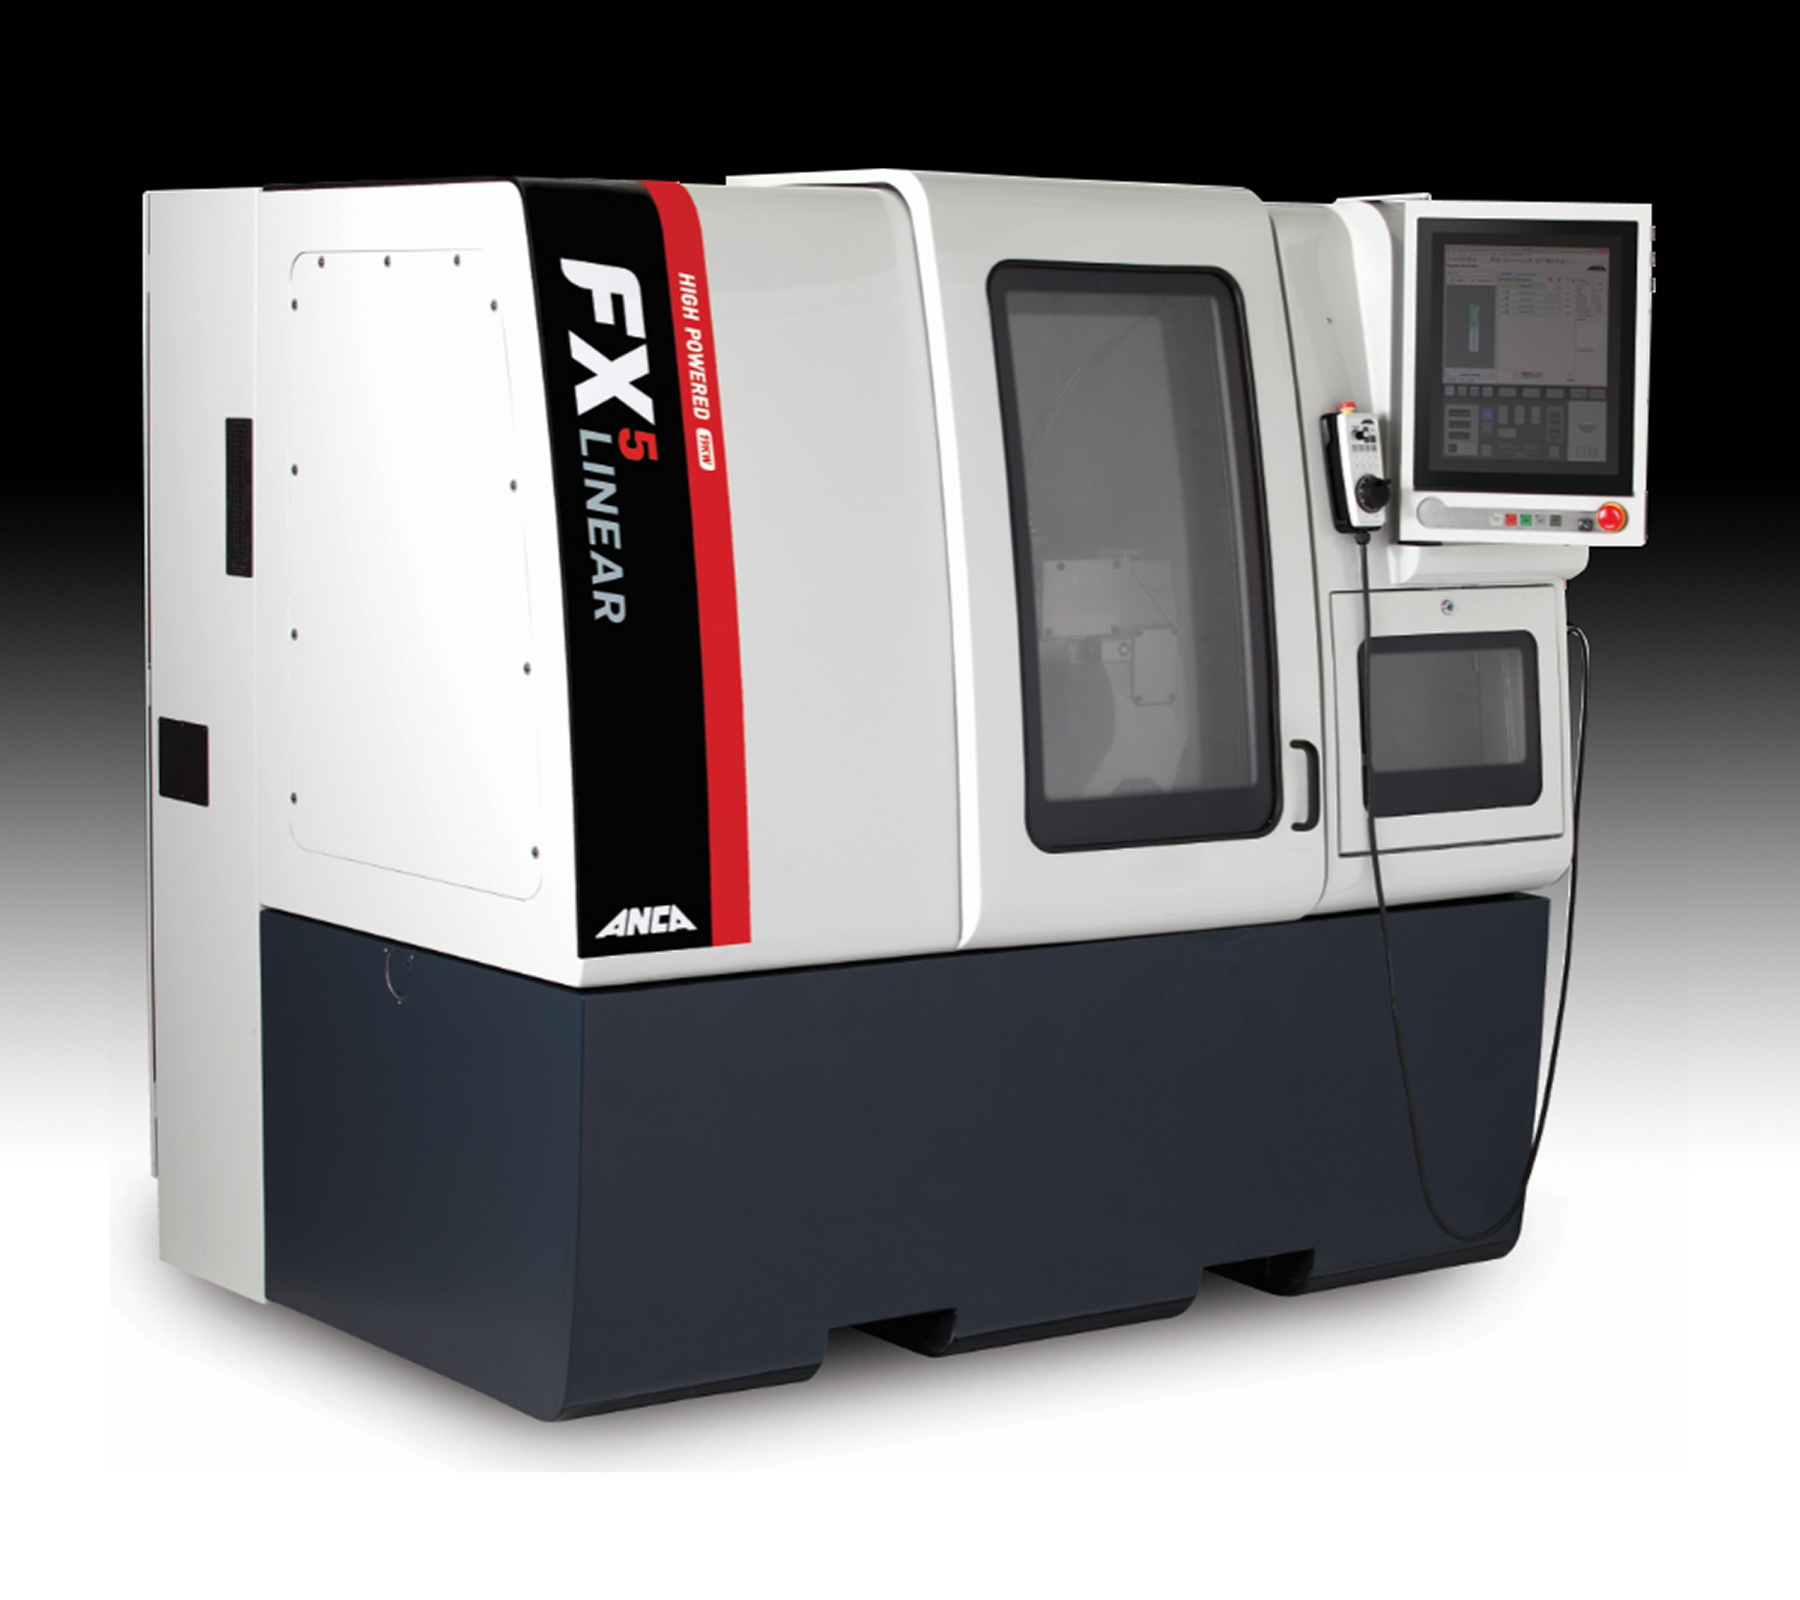 The machine how features a grinding spindle rated at 12kW peak power with an additional high-powered spindle option of 19kW.